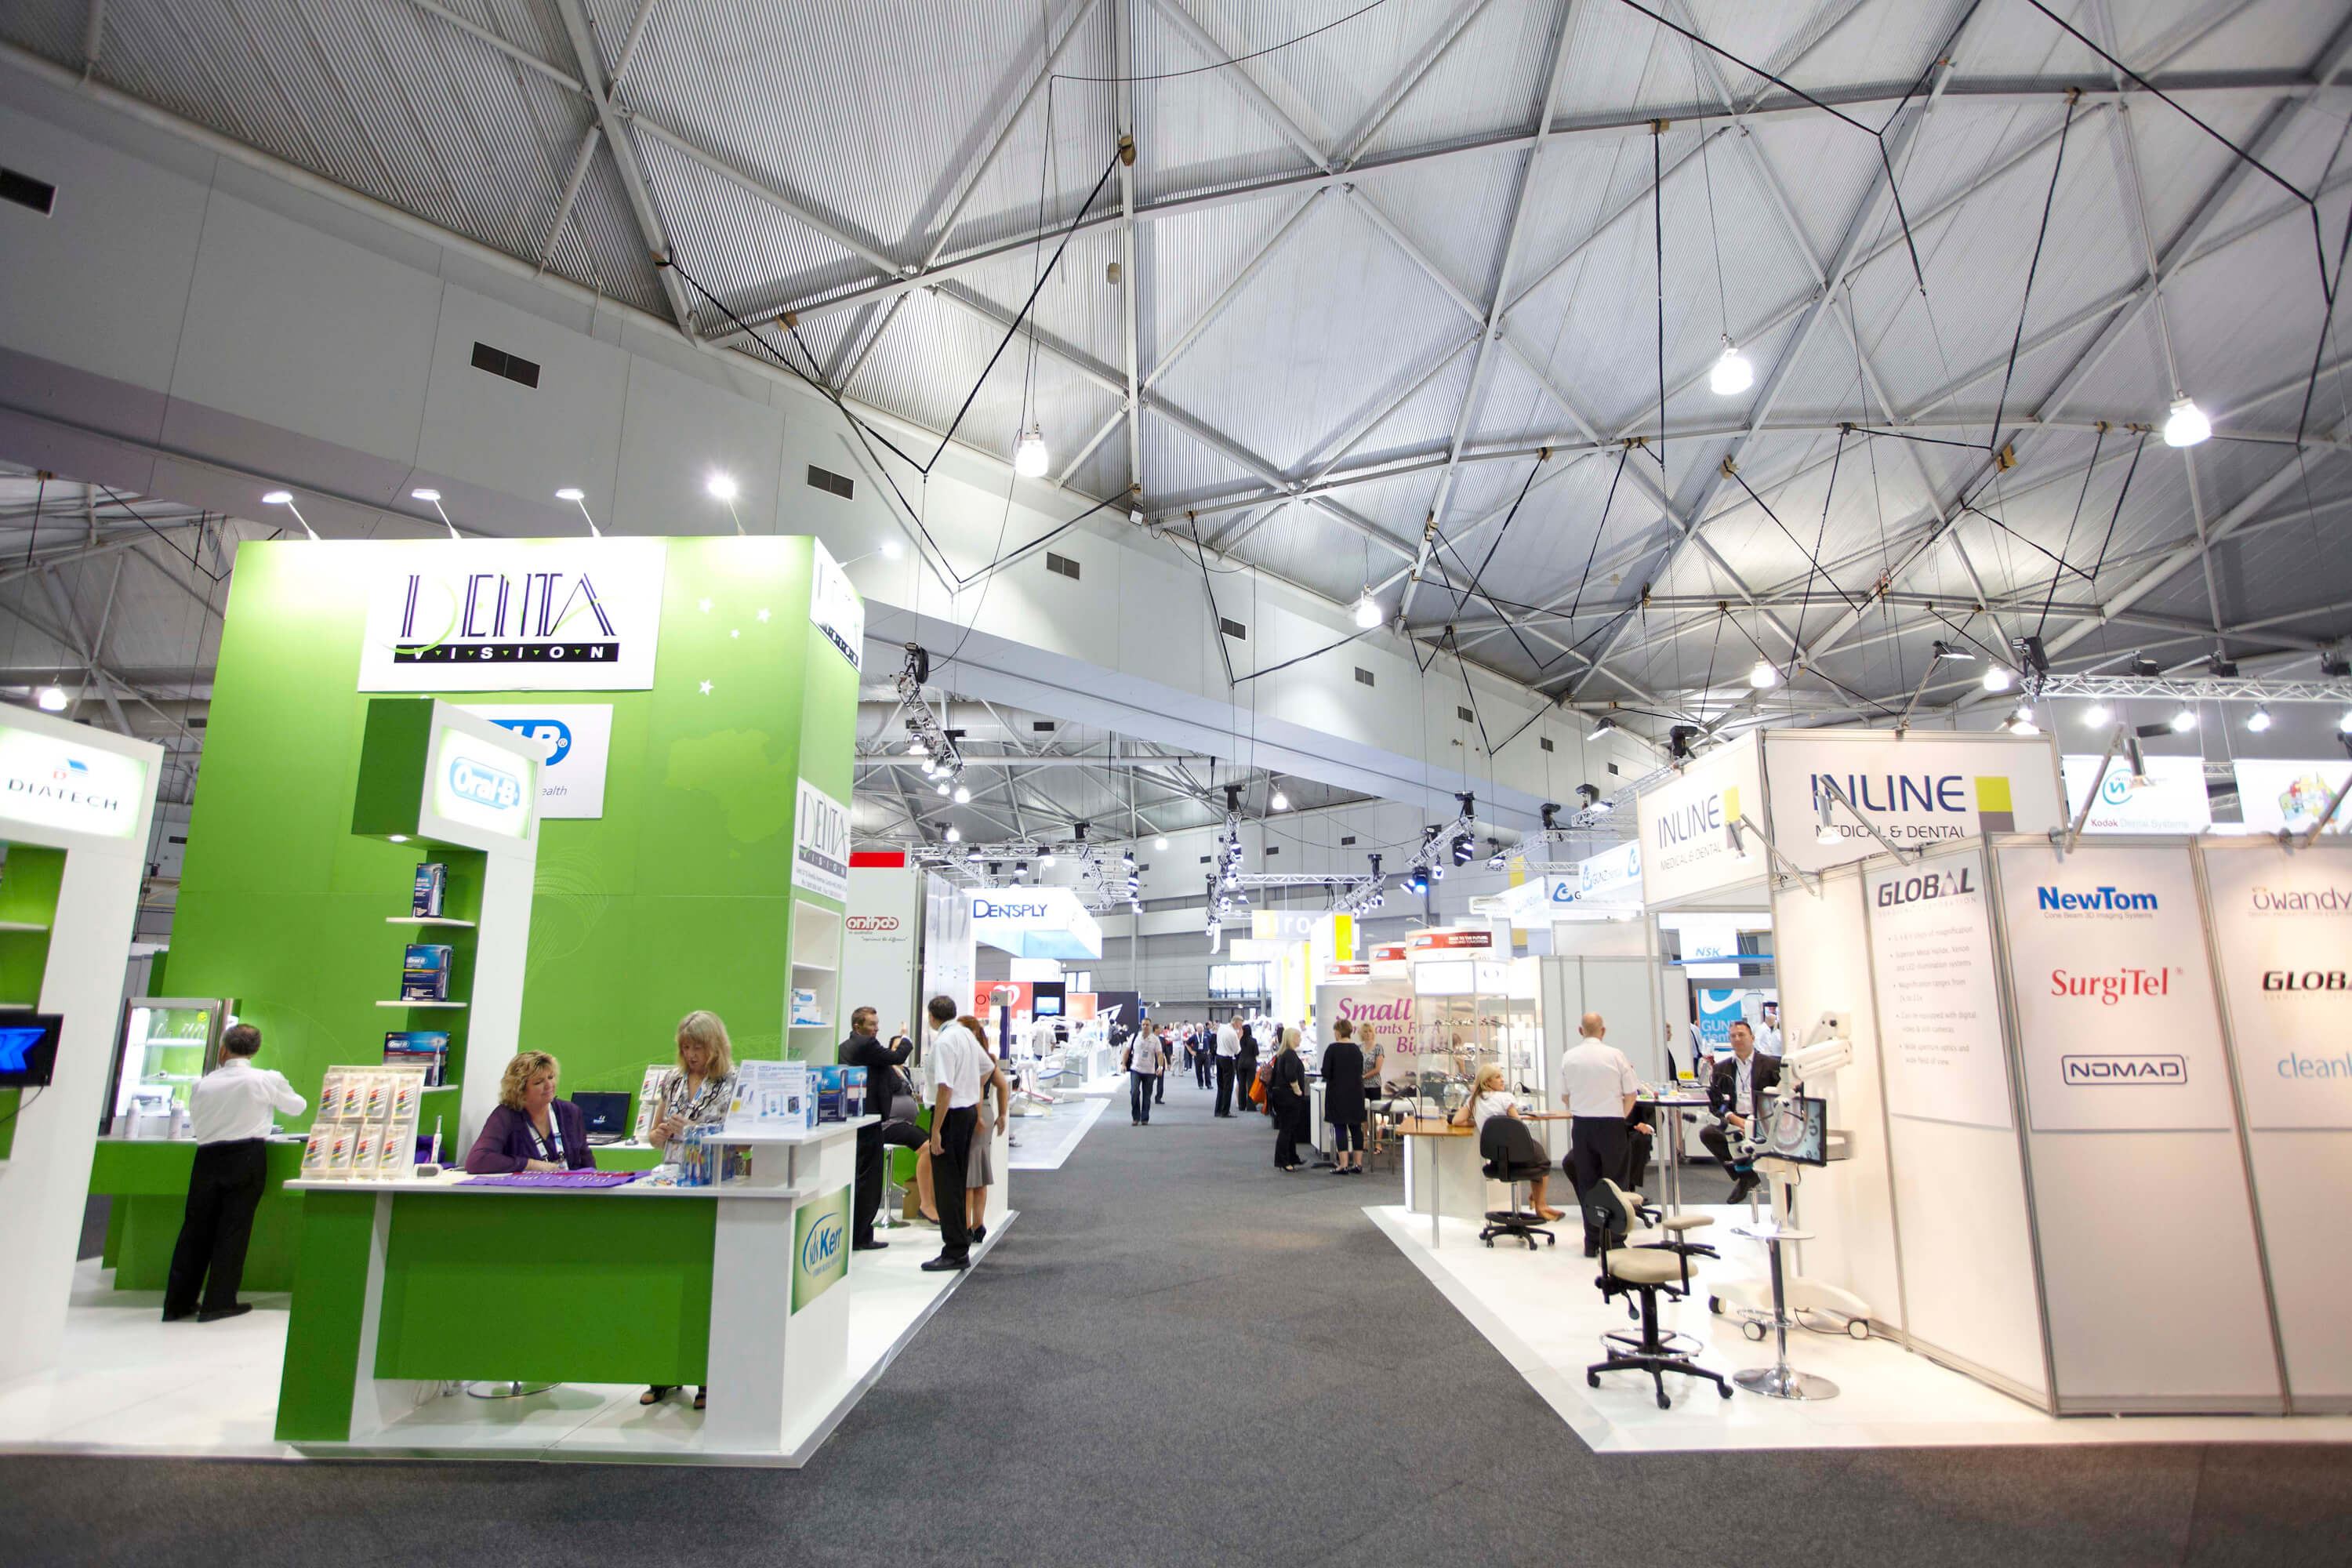 What Makes Smart City Networks Tick? - exhibition hall 